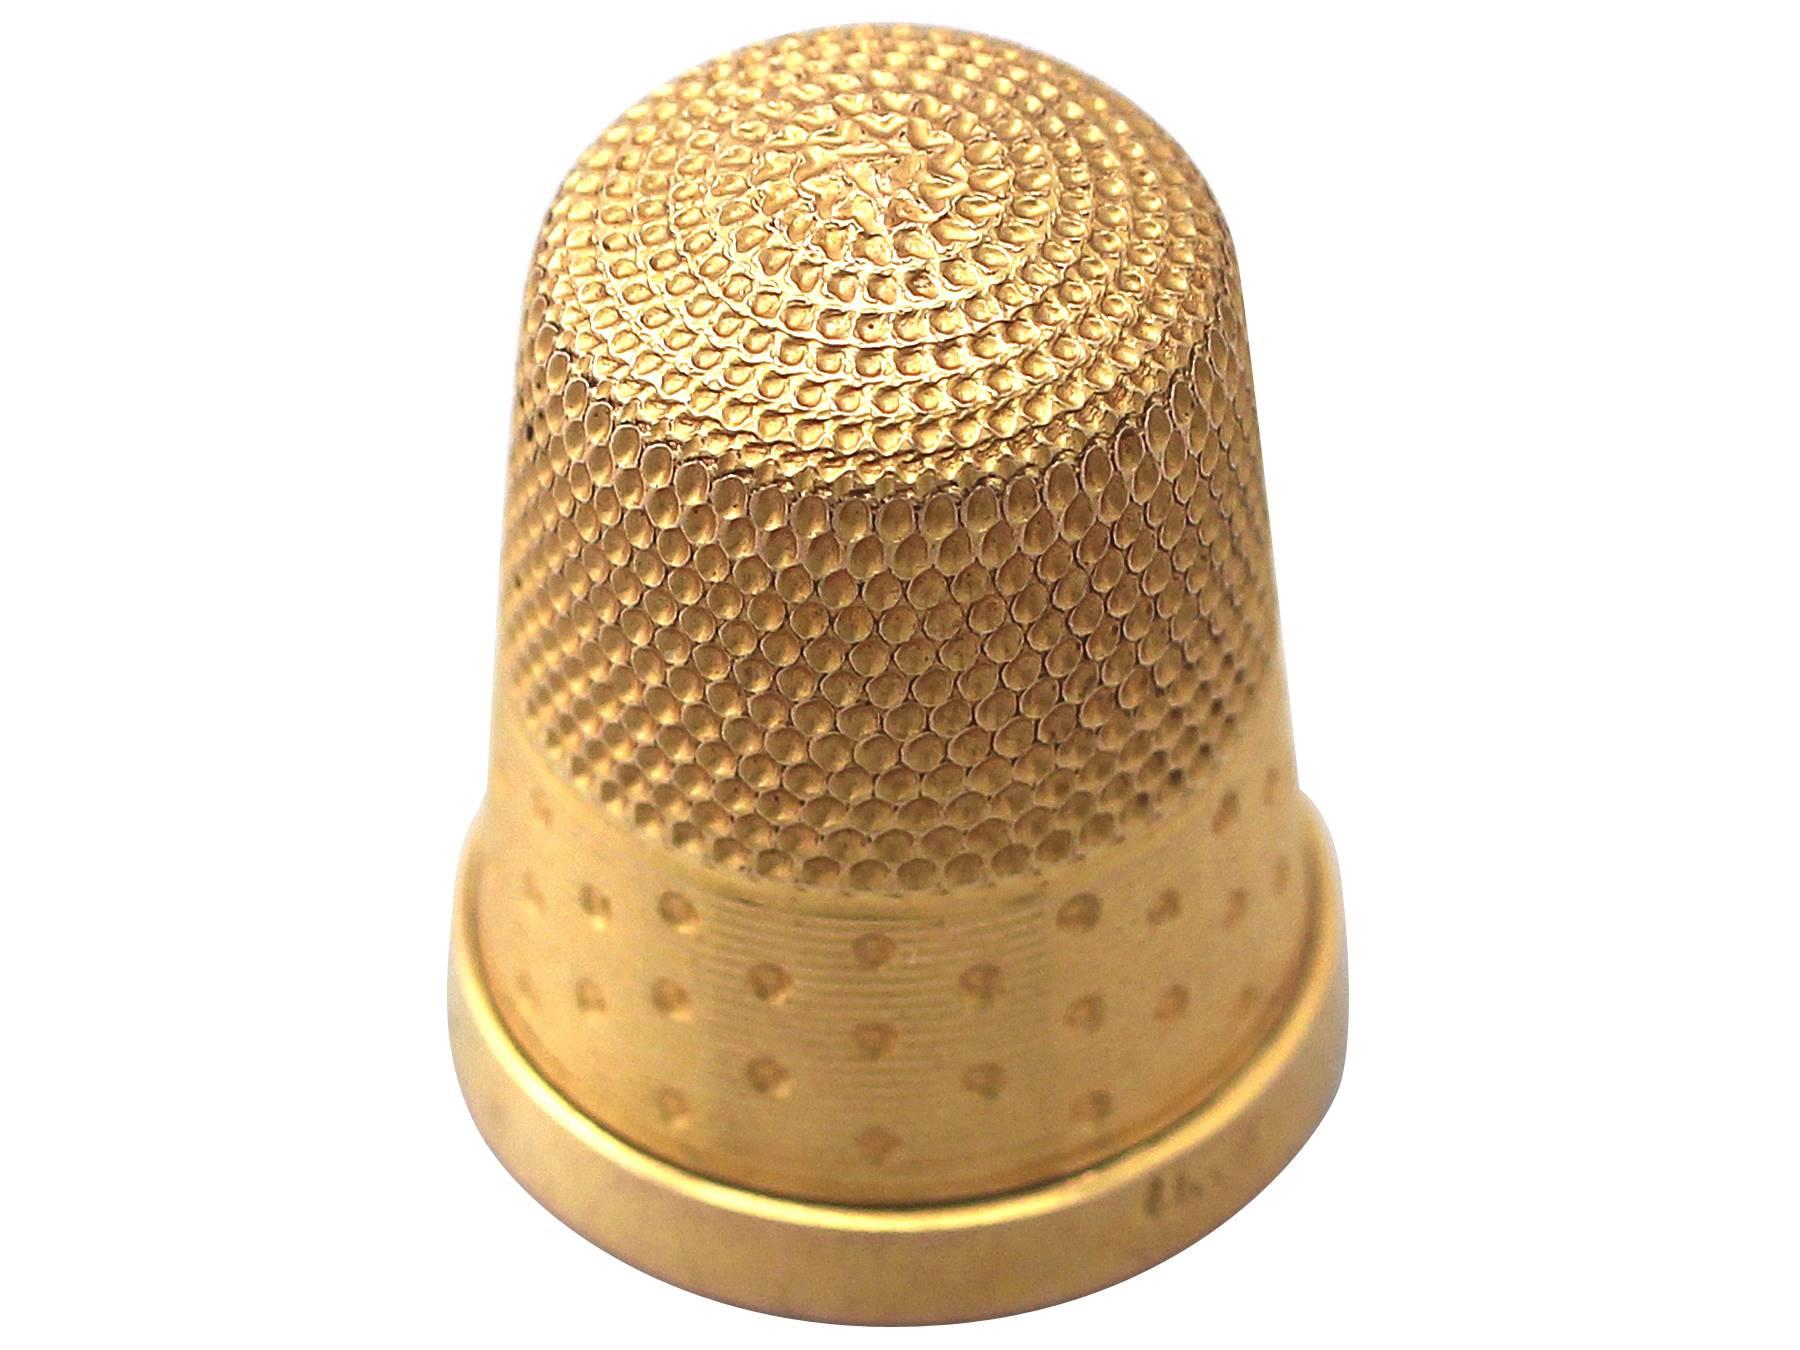 A fine and impressive antique Victorian 15 karat yellow gold thimble; an addition to our diverse range of collectable antiques

This fine and impressive antique thimble has been crafted in 15k yellow gold.

The thimble has a pitted crown and a